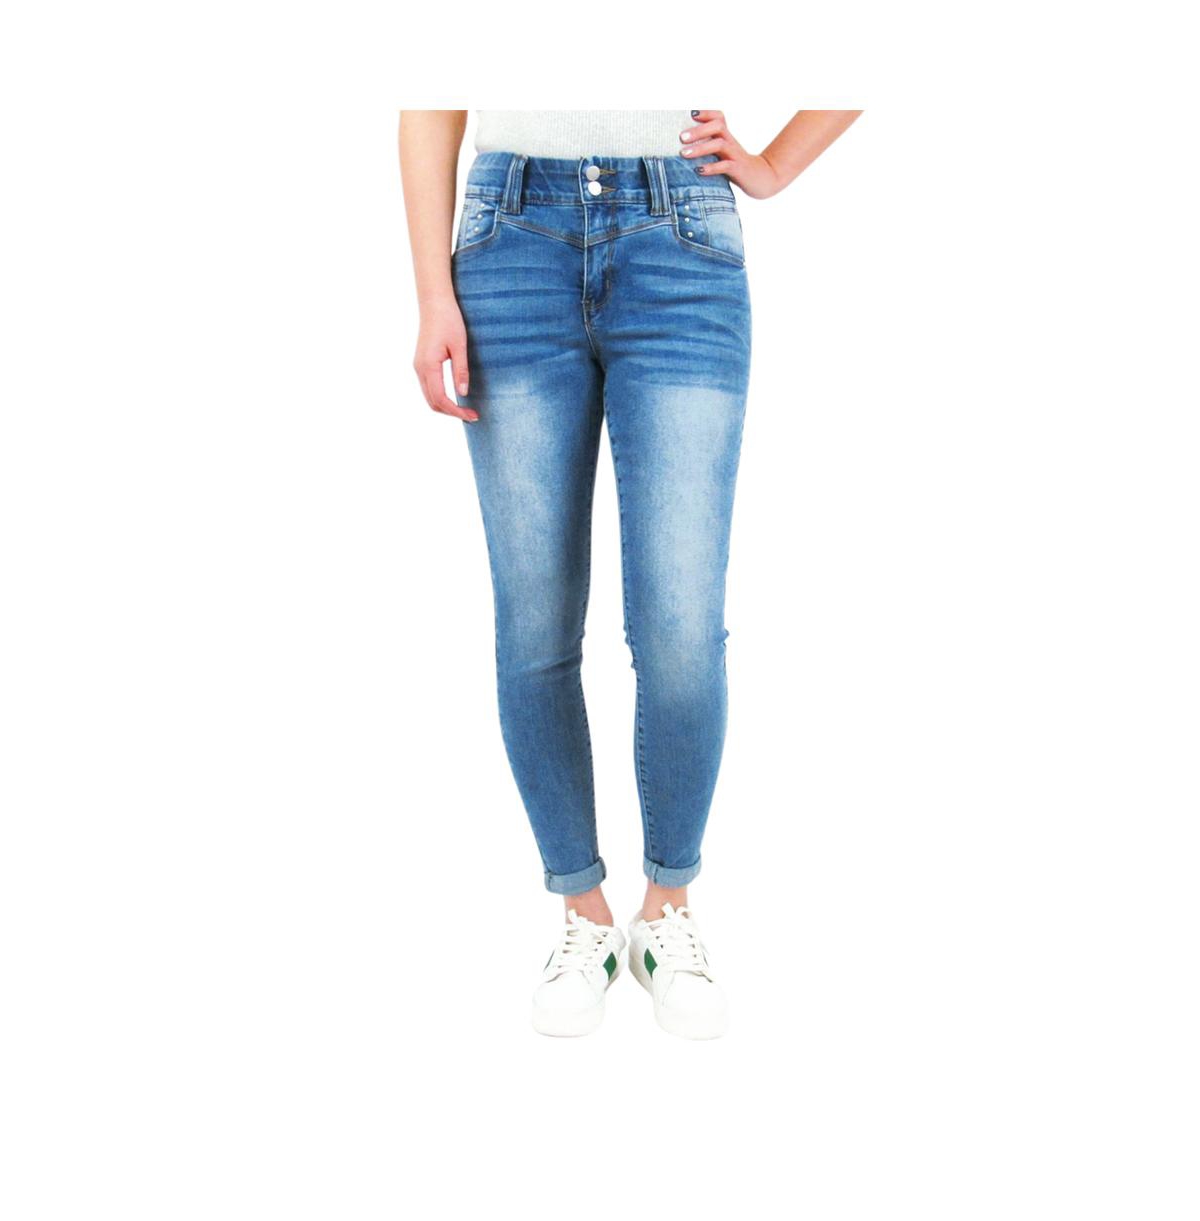 Tummy Control Skinny Jeans with Jewel Pocket Details For Women - Blue